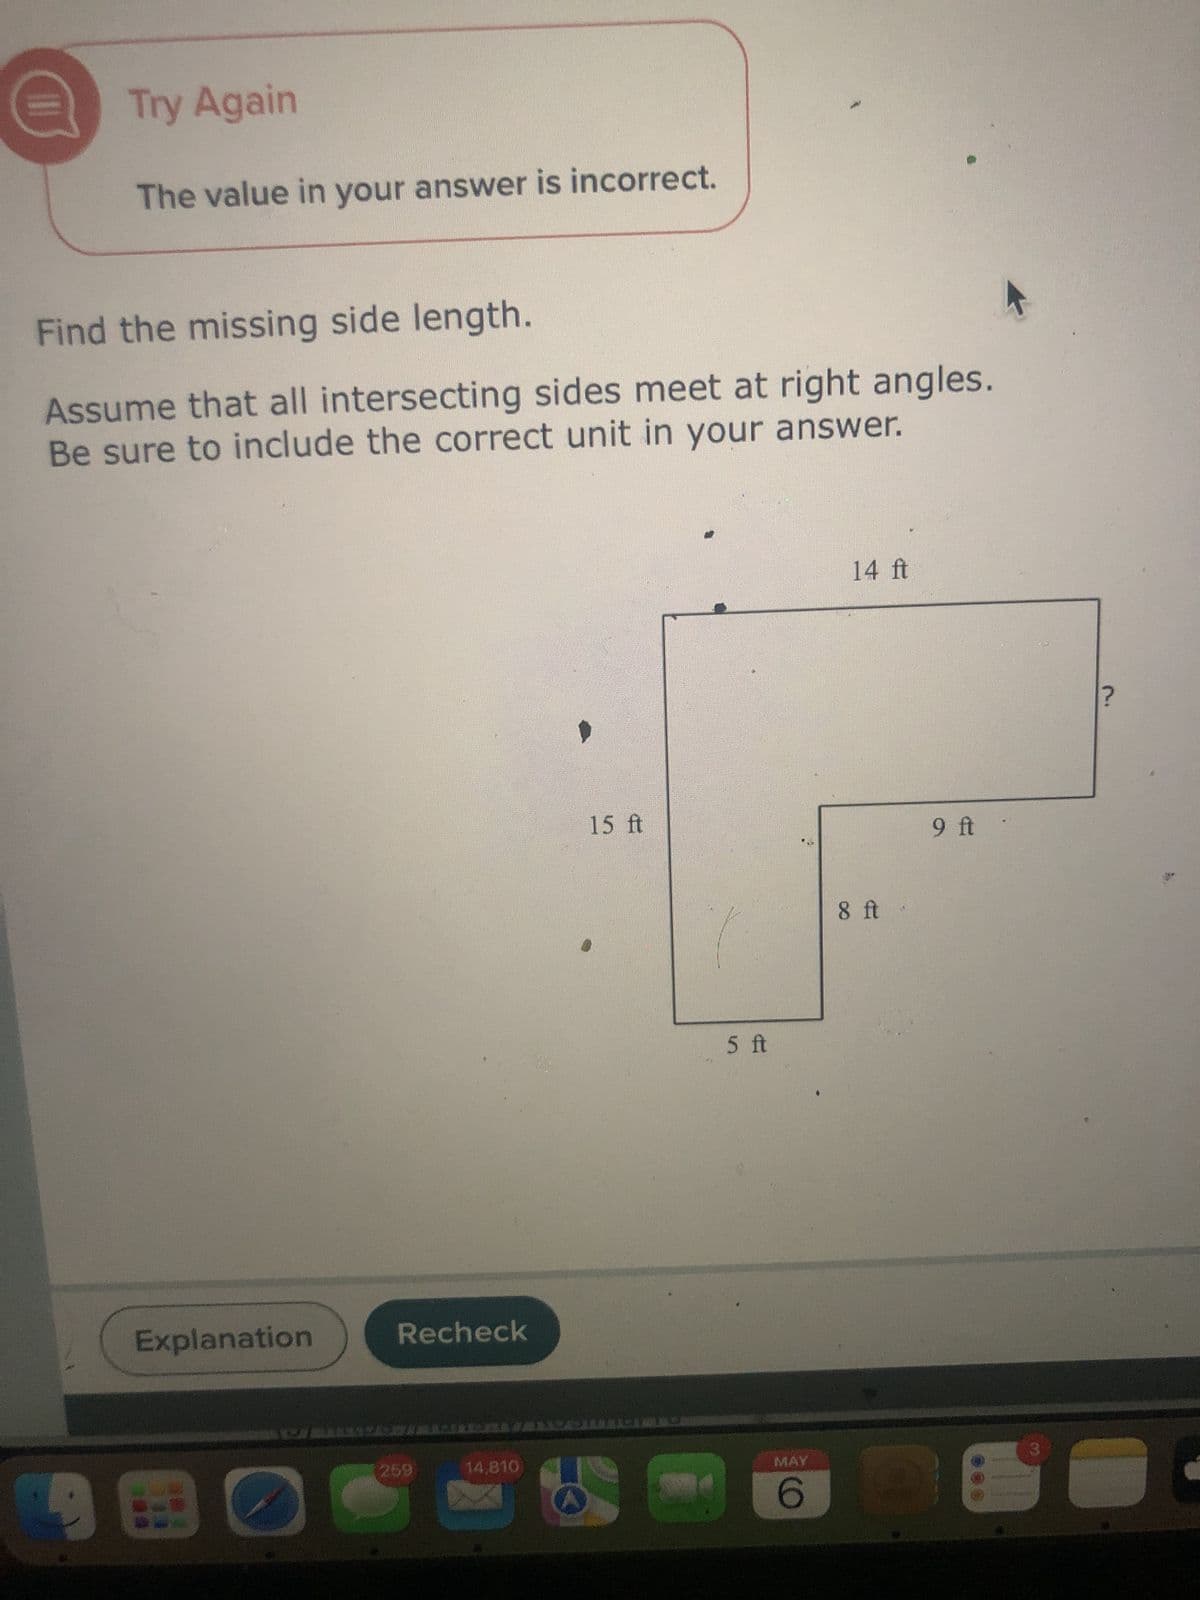 Try Again
The value in your answer is incorrect.
Find the missing side length.
Assume that all intersecting sides meet at right angles.
Be sure to include the correct unit in your answer.
Explanation
Recheck
259
14,810
15 ft
5 ft
14 ft
8 ft
9 ft
MAY
3
6
?